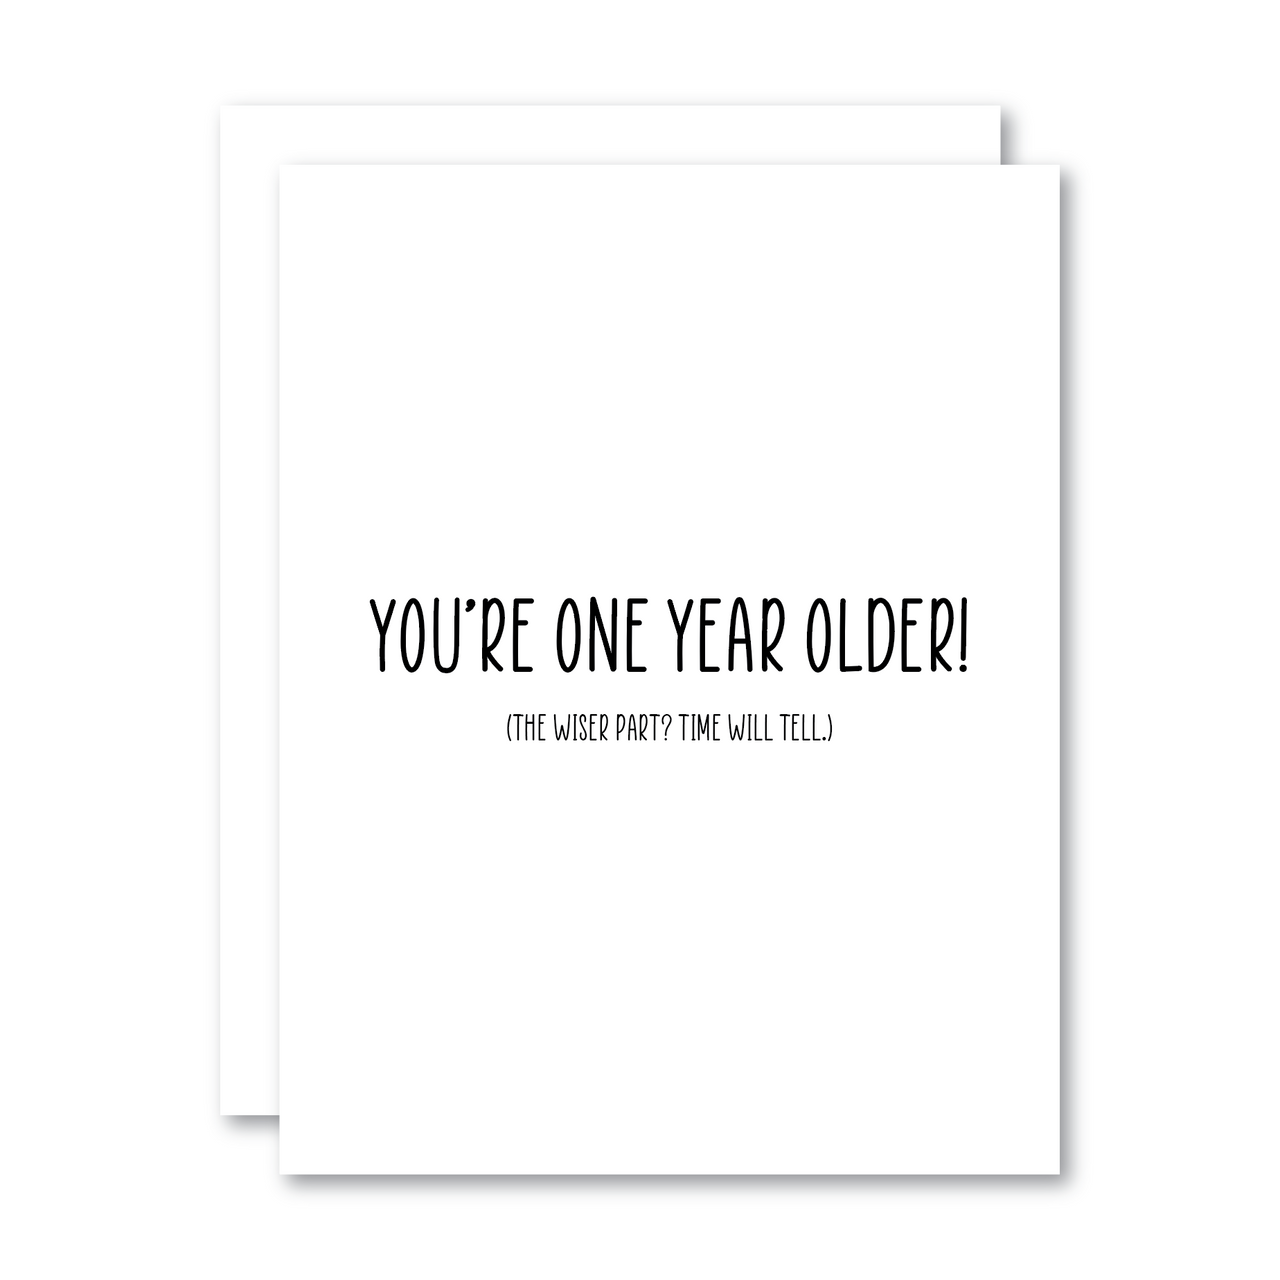 You're One Year Older! The Wiser Part? Time Will Tell